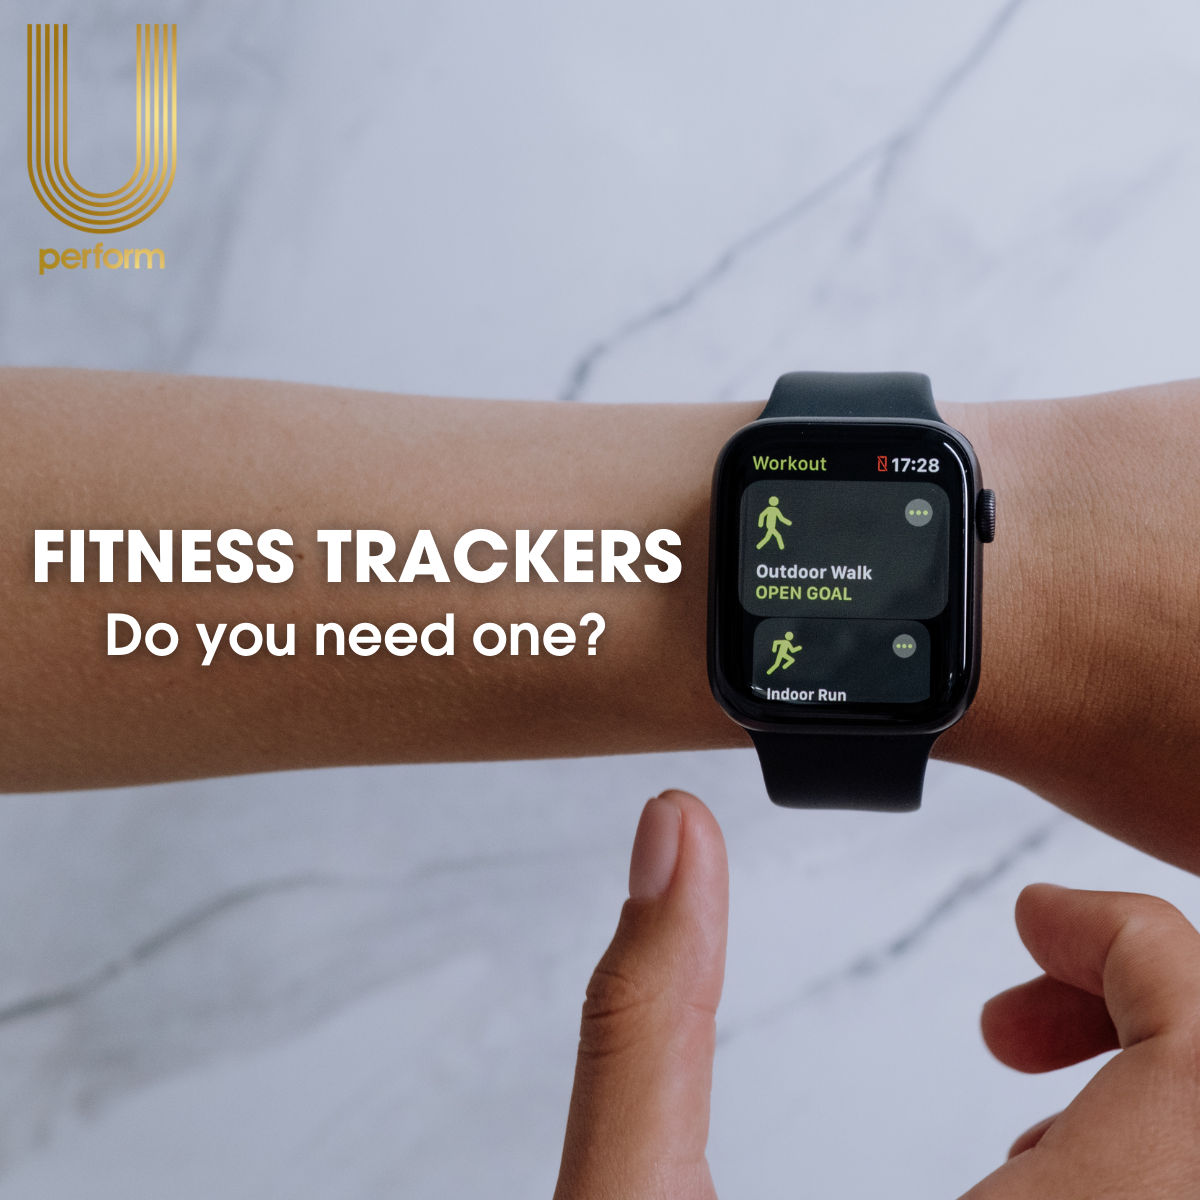 How to use a fitness tracker